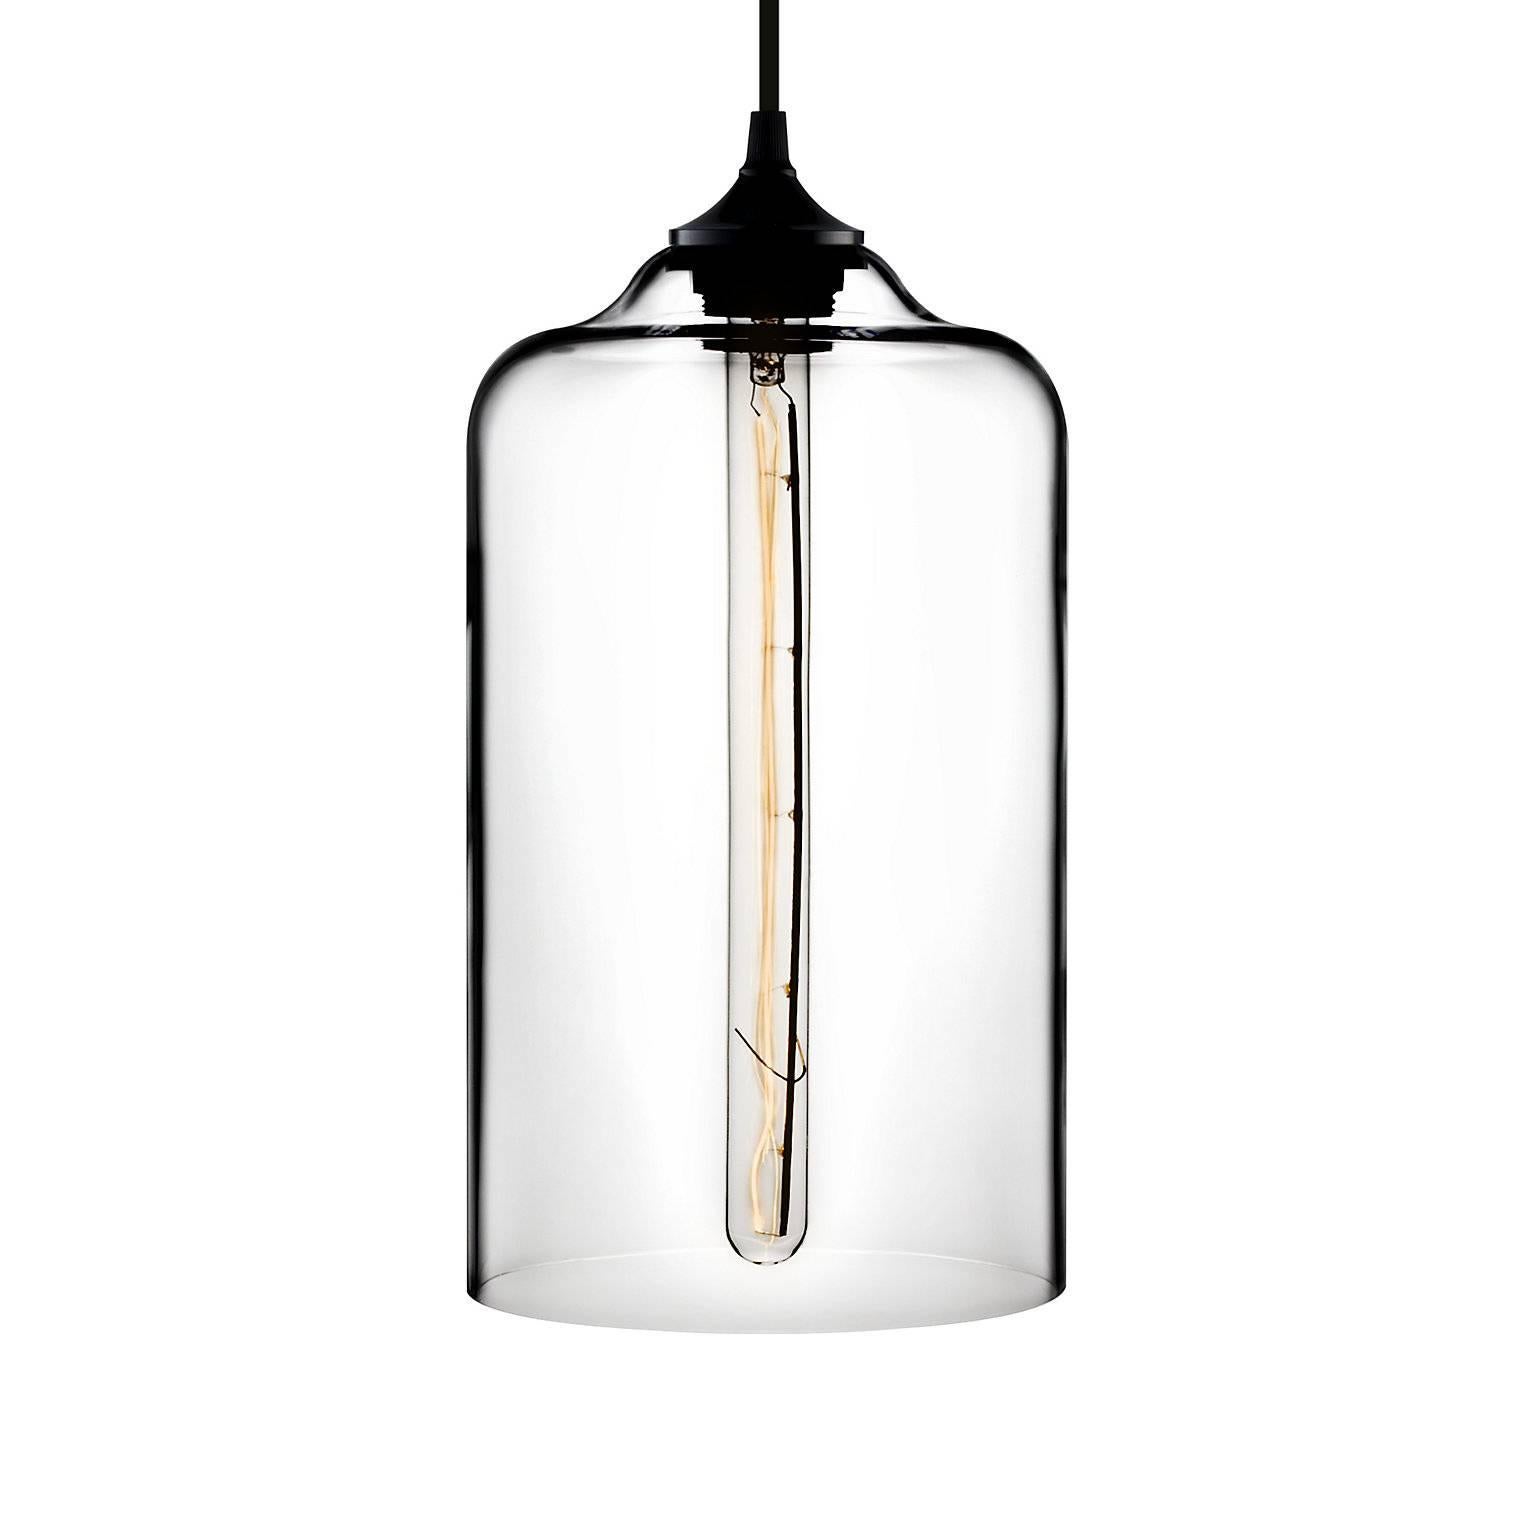 Celebrating iconic design, the Bell Jar and its sleeker companion, the Bella, cast glorious beams of light that are as warm as they are welcoming. Every single glass pendant light that comes from Niche is handblown by real human beings in a